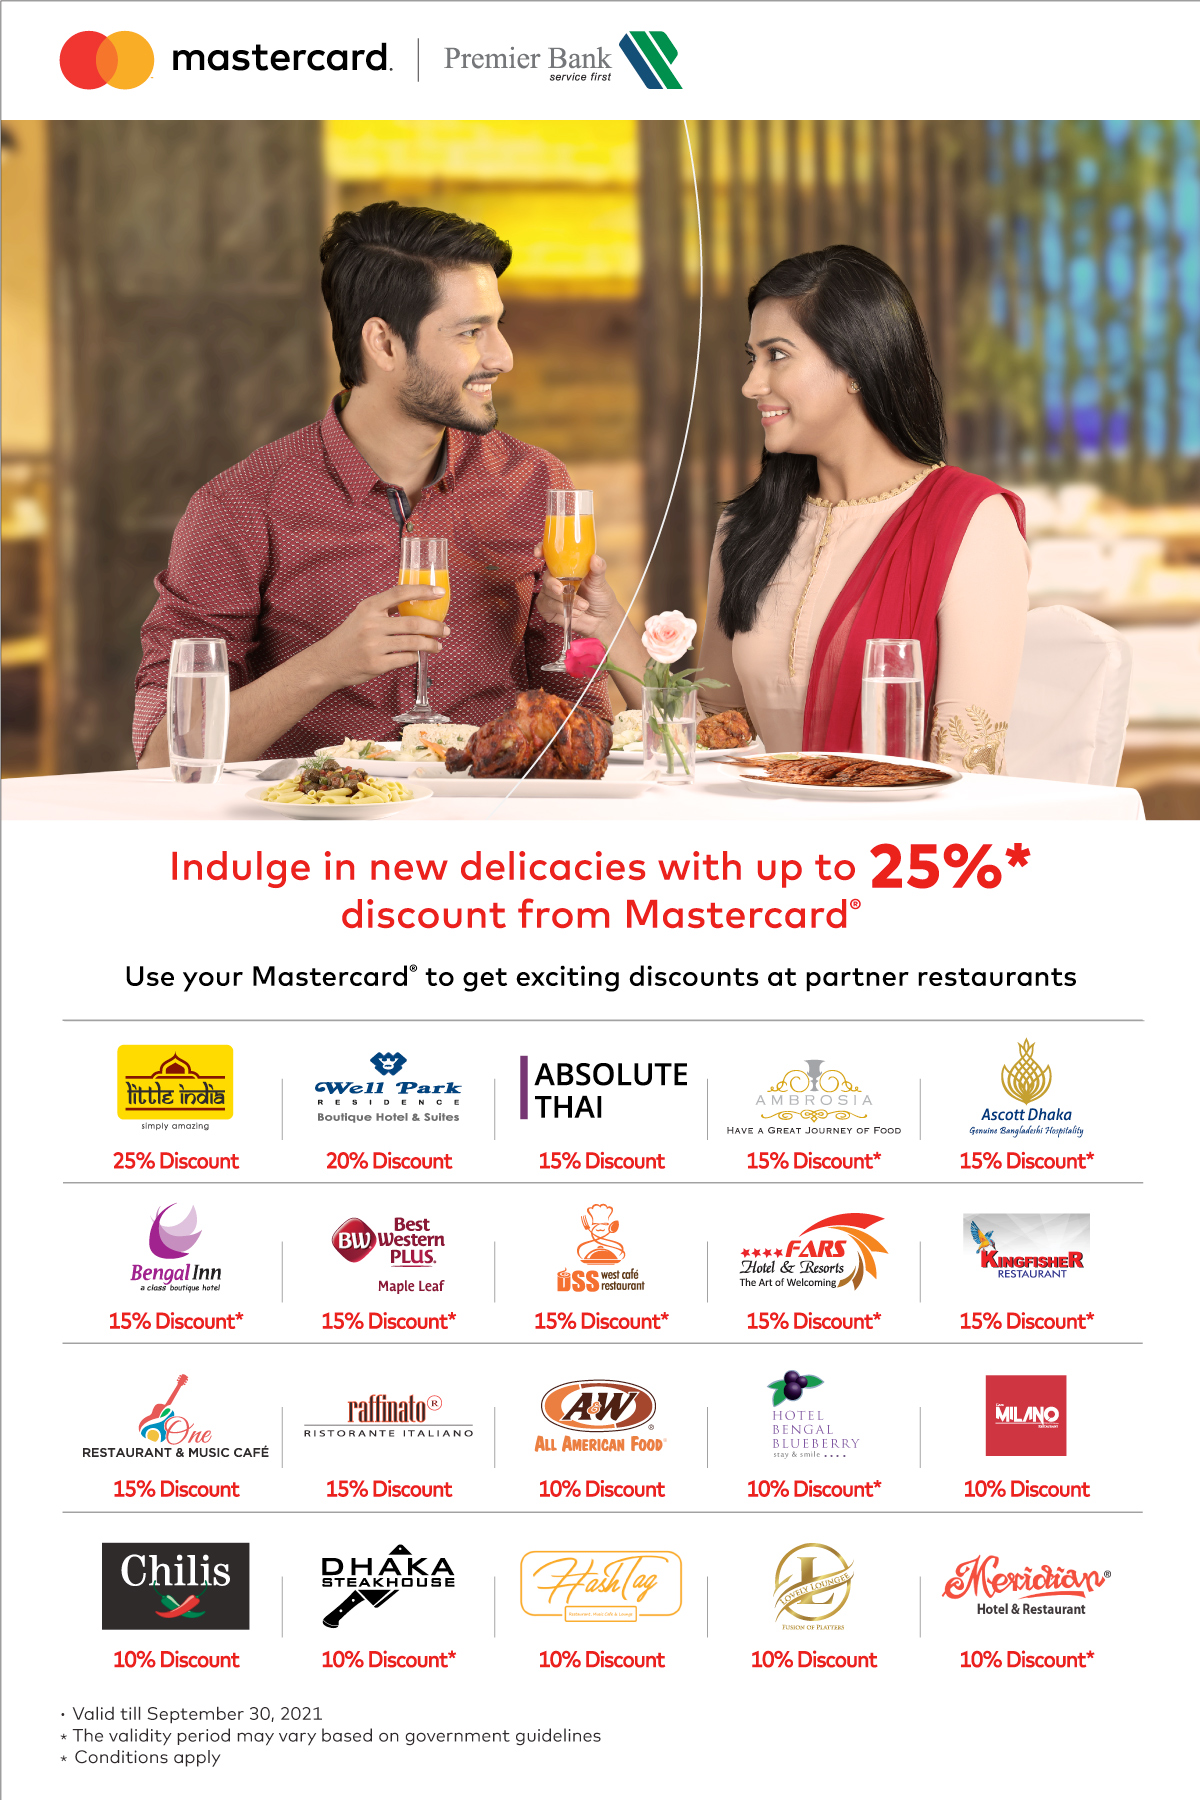 Indulge in New Delicacies Discounts by Premier Bank Mastercard